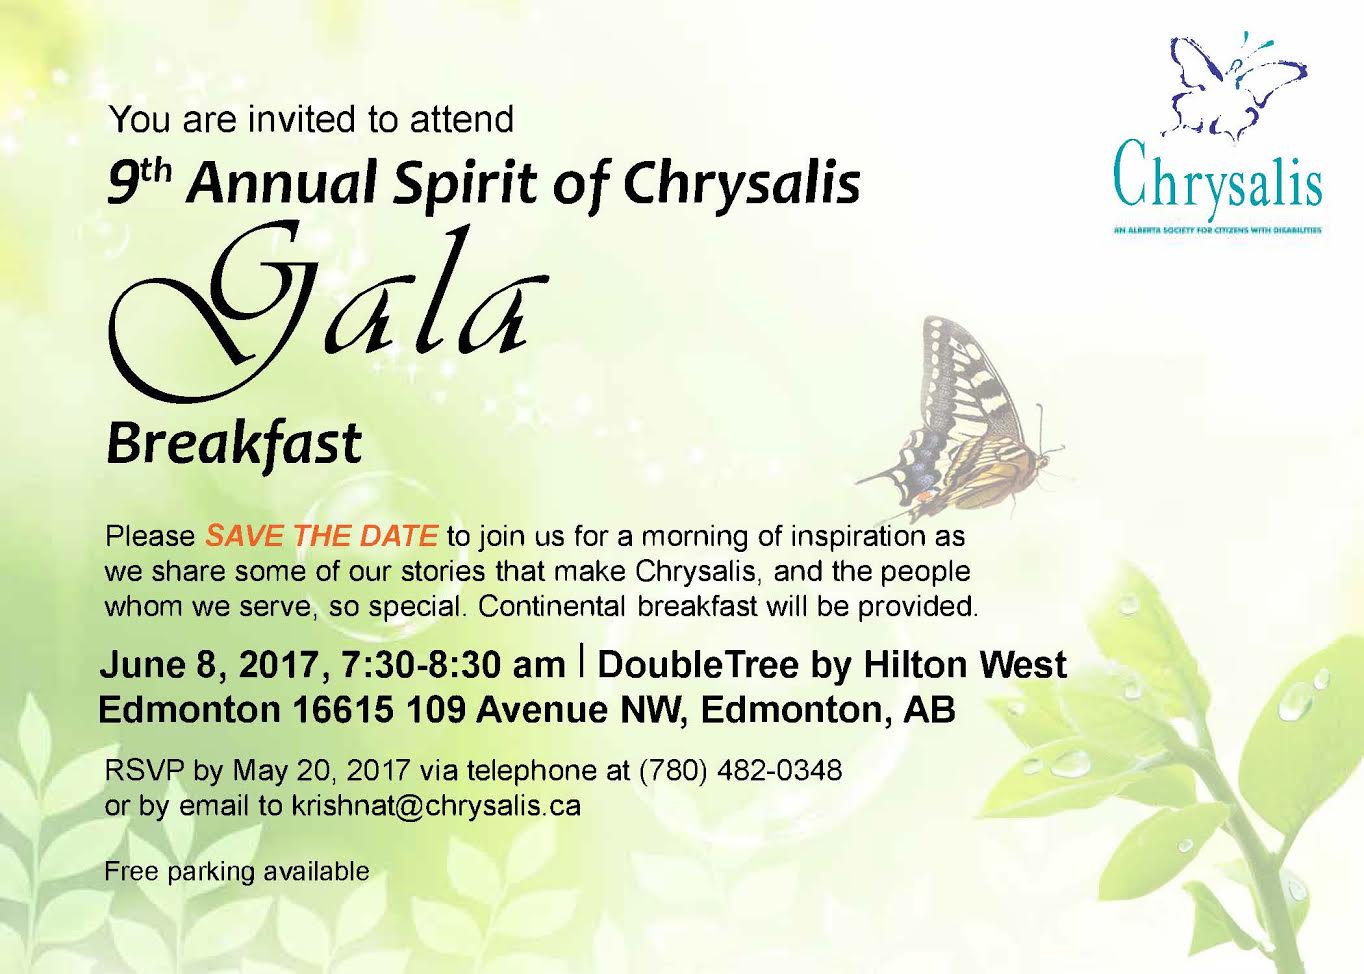 Preferred Client Services at the 9th Annual Spirit of Chrysalis